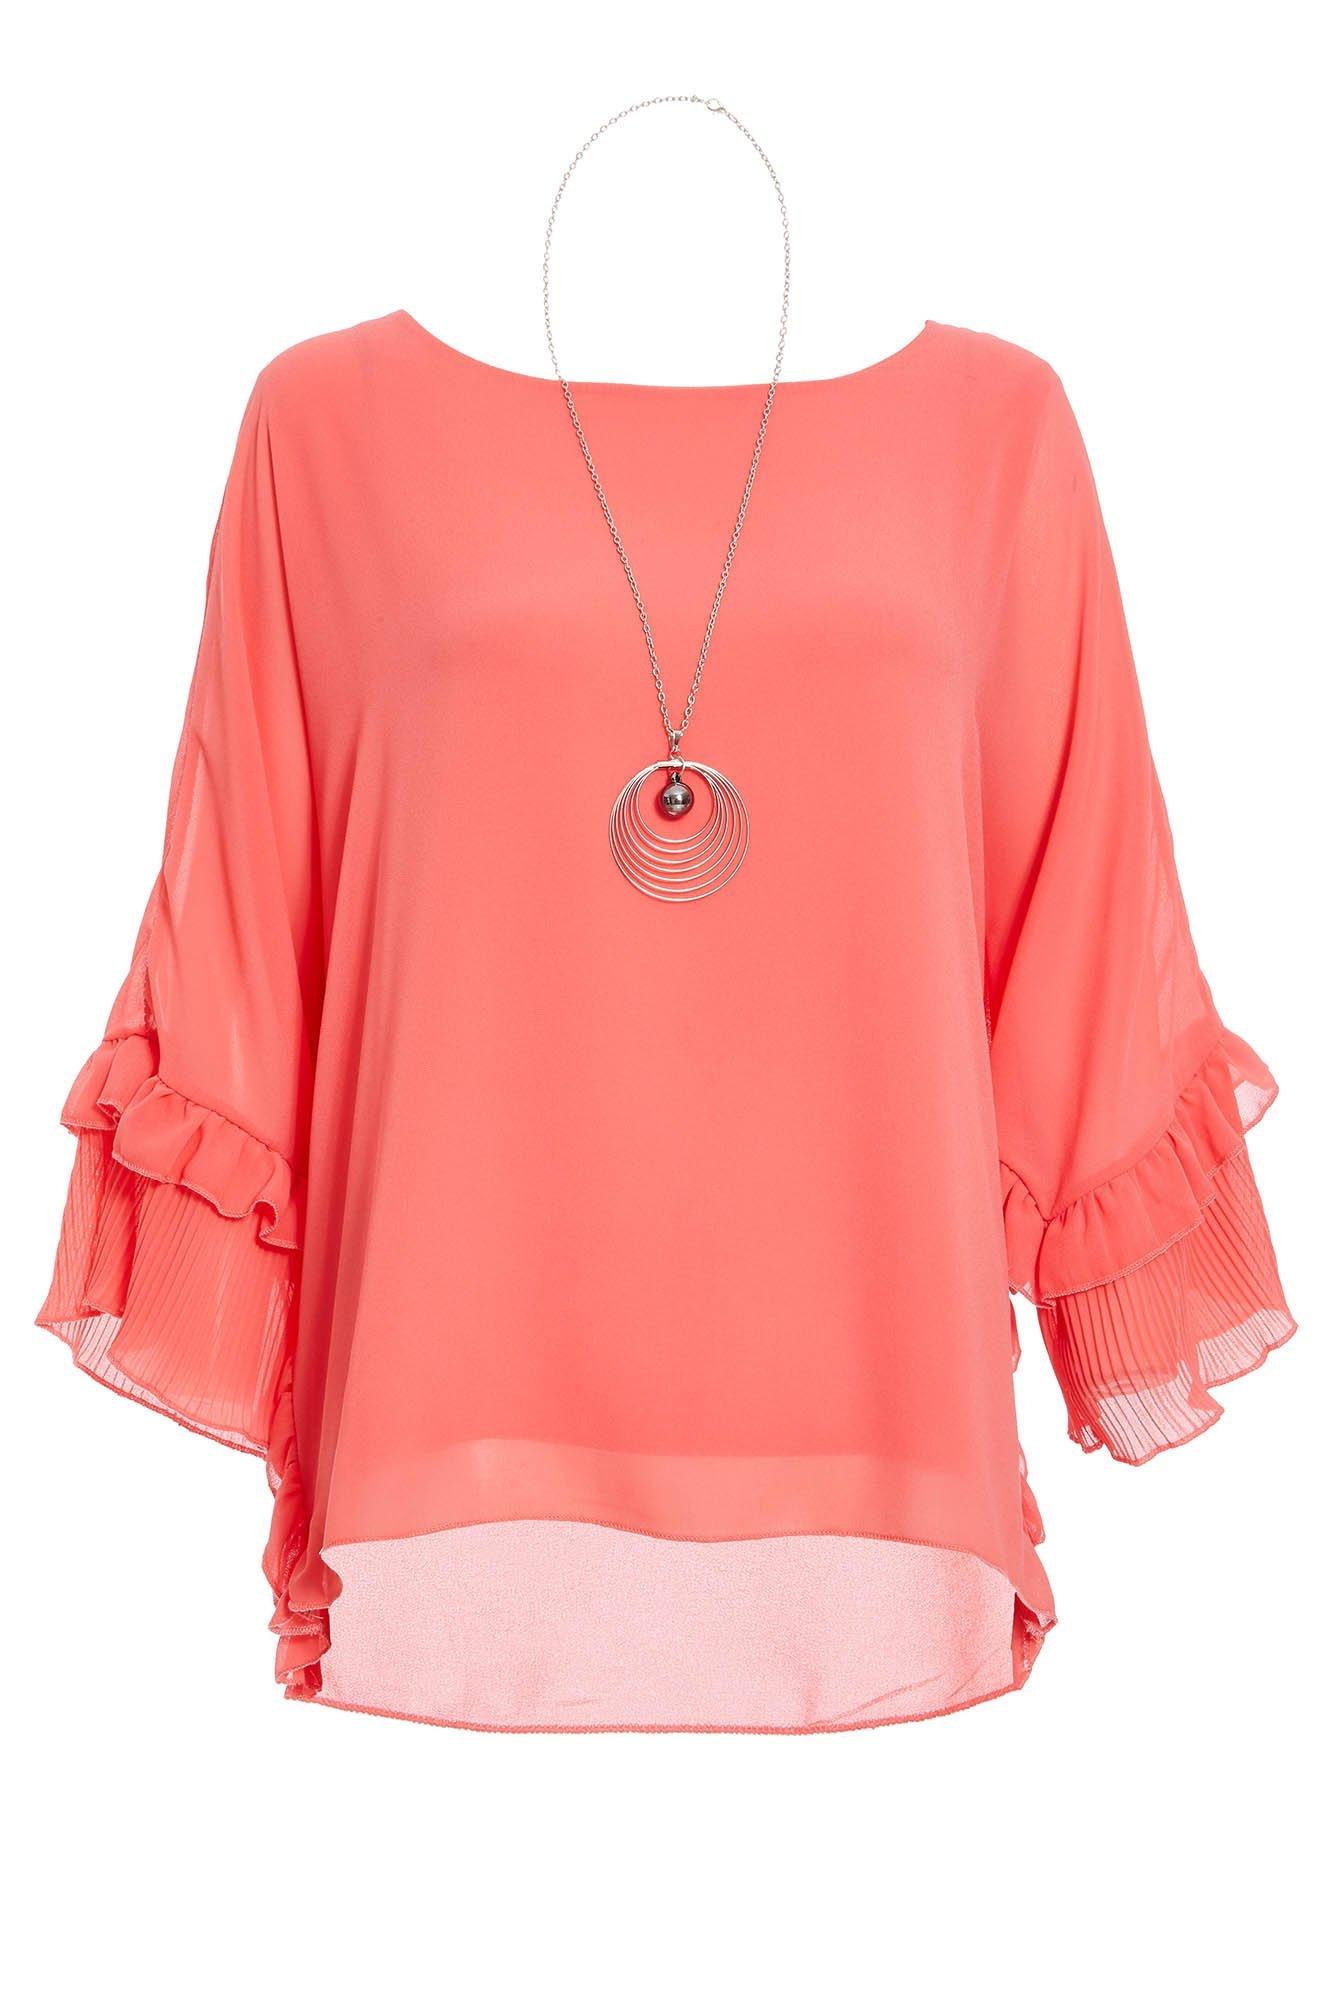 Coral Chiffon Floral Batwing Necklace Top - Quiz Clothing